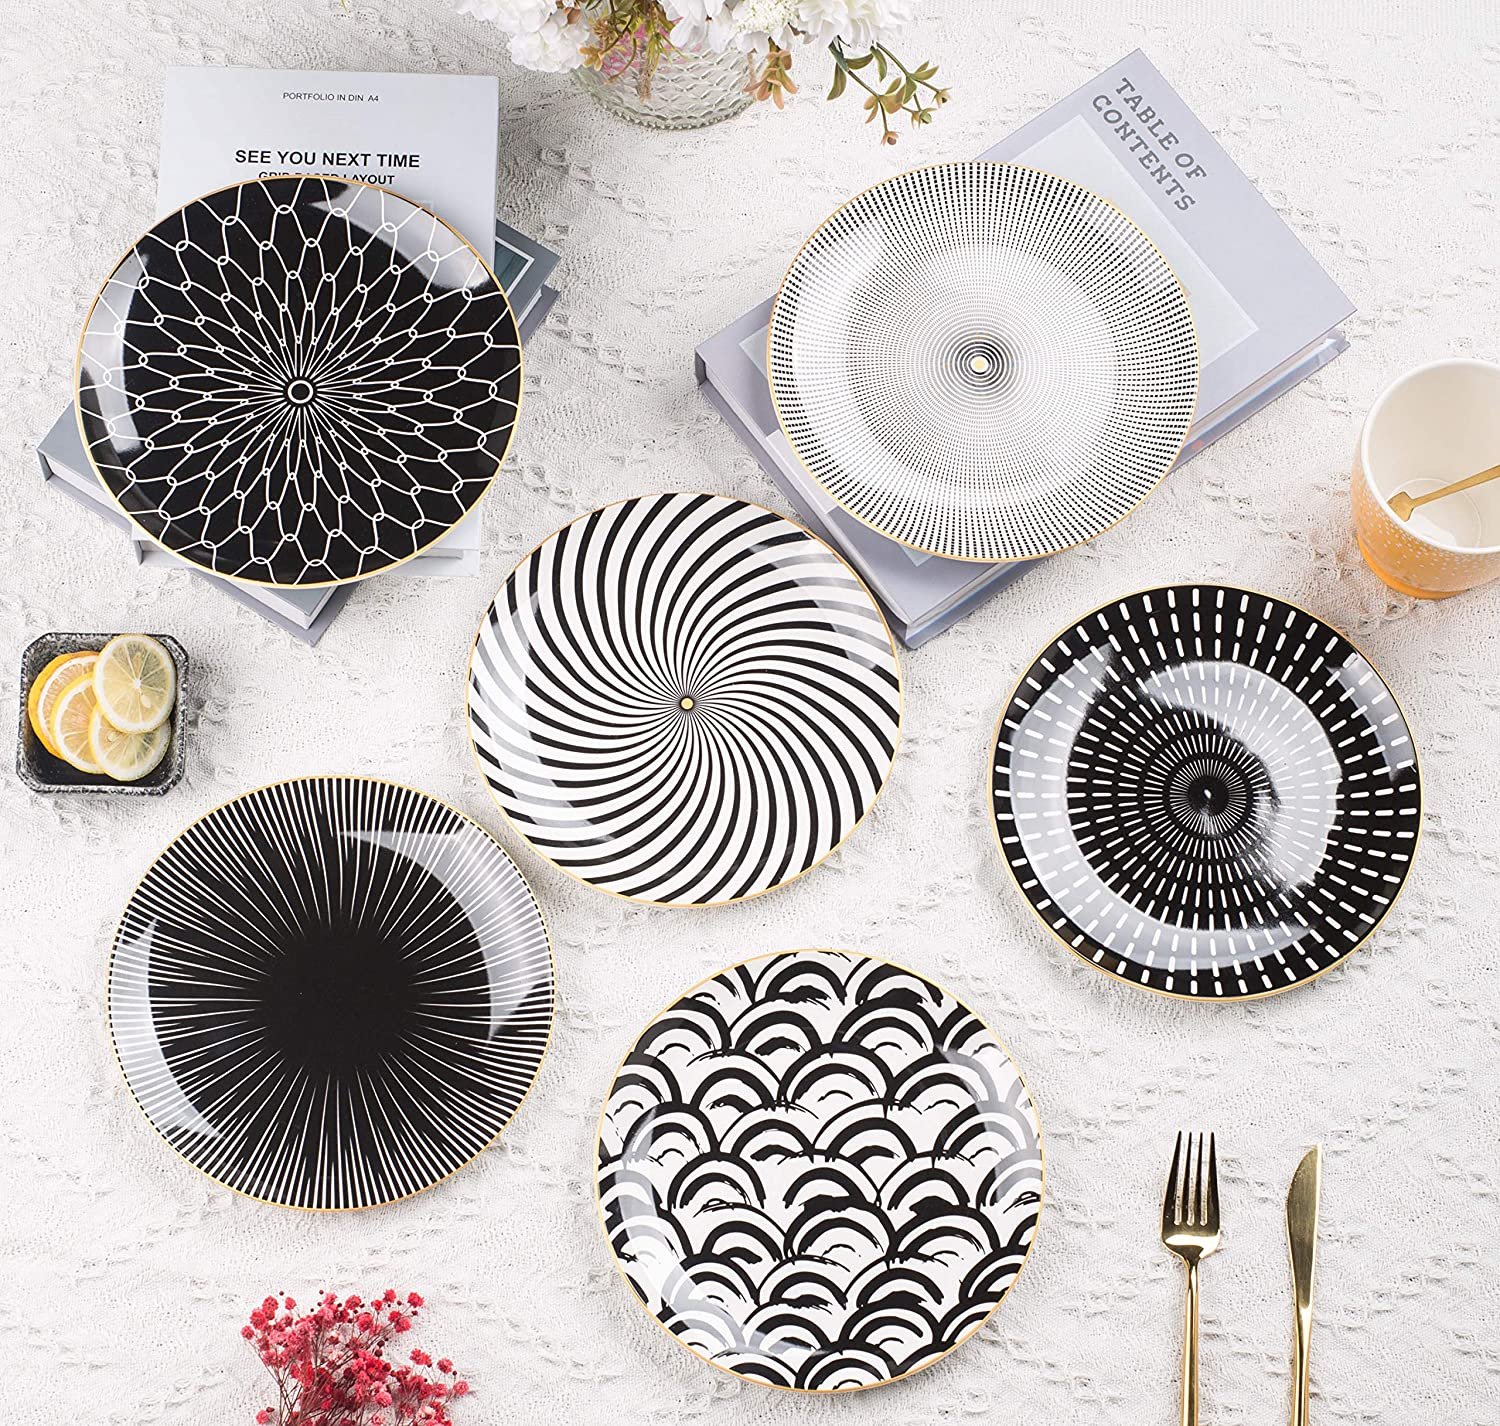 Mix and Match Black and White Dinner Plates with Gold Rim.jpg